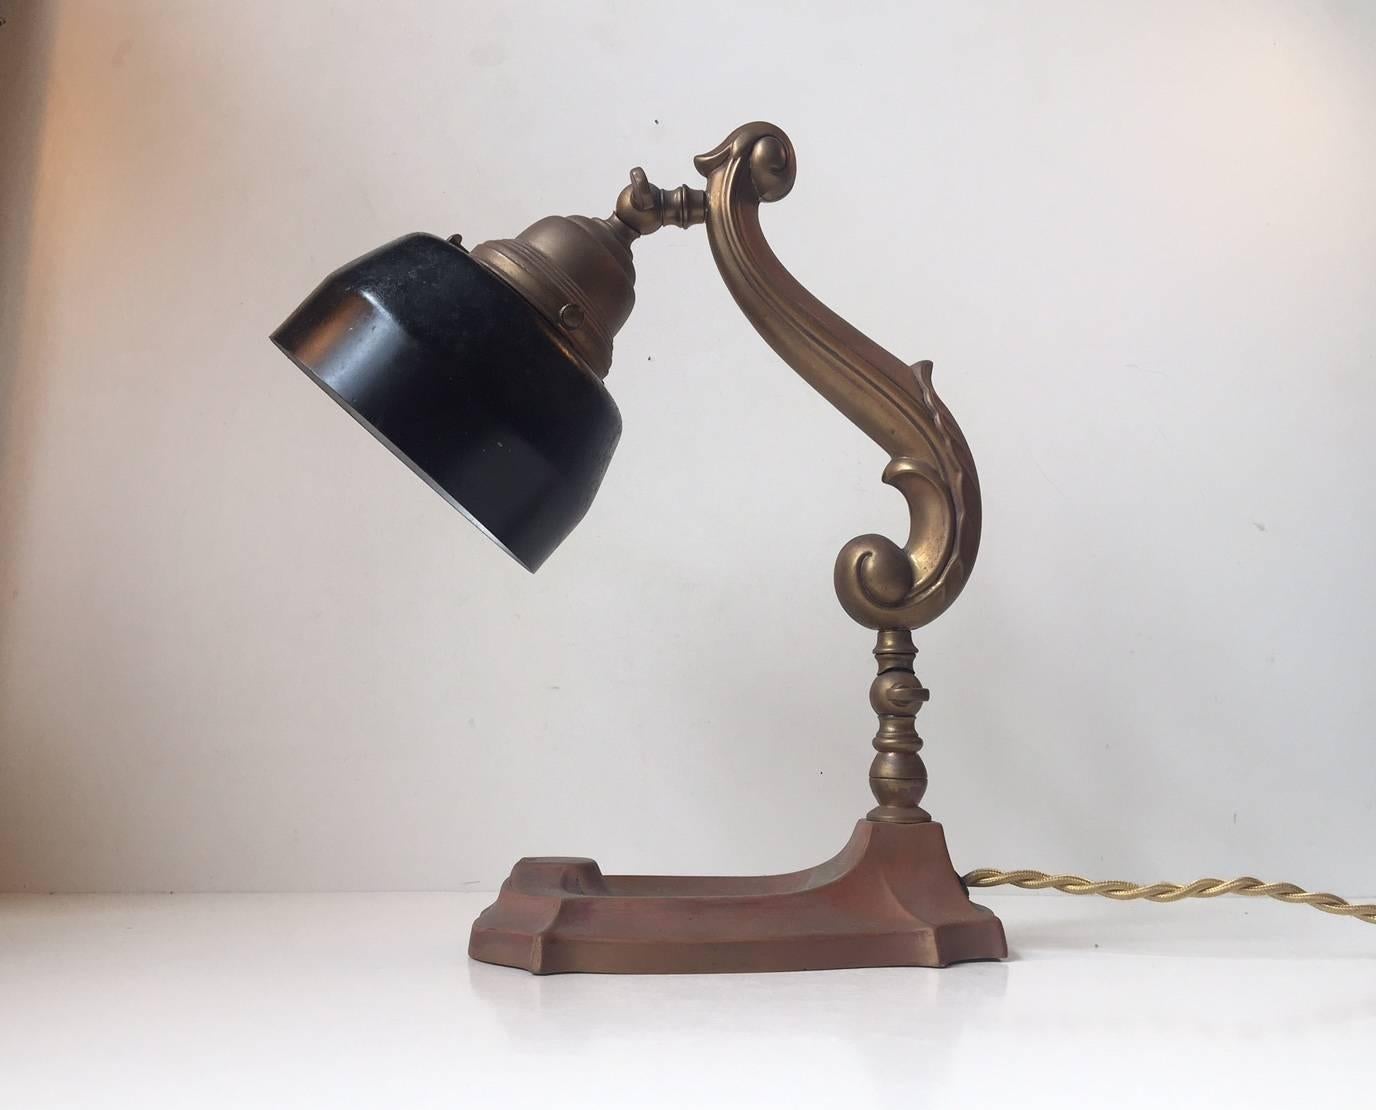 Ornate and beautifully made Danish, 1920s desk lamp with frame and base of patinated copper and brass. Its mounted with a black steel shade that may have been applied later on. It has its original porcelain fitting for E27 large lightbulb.